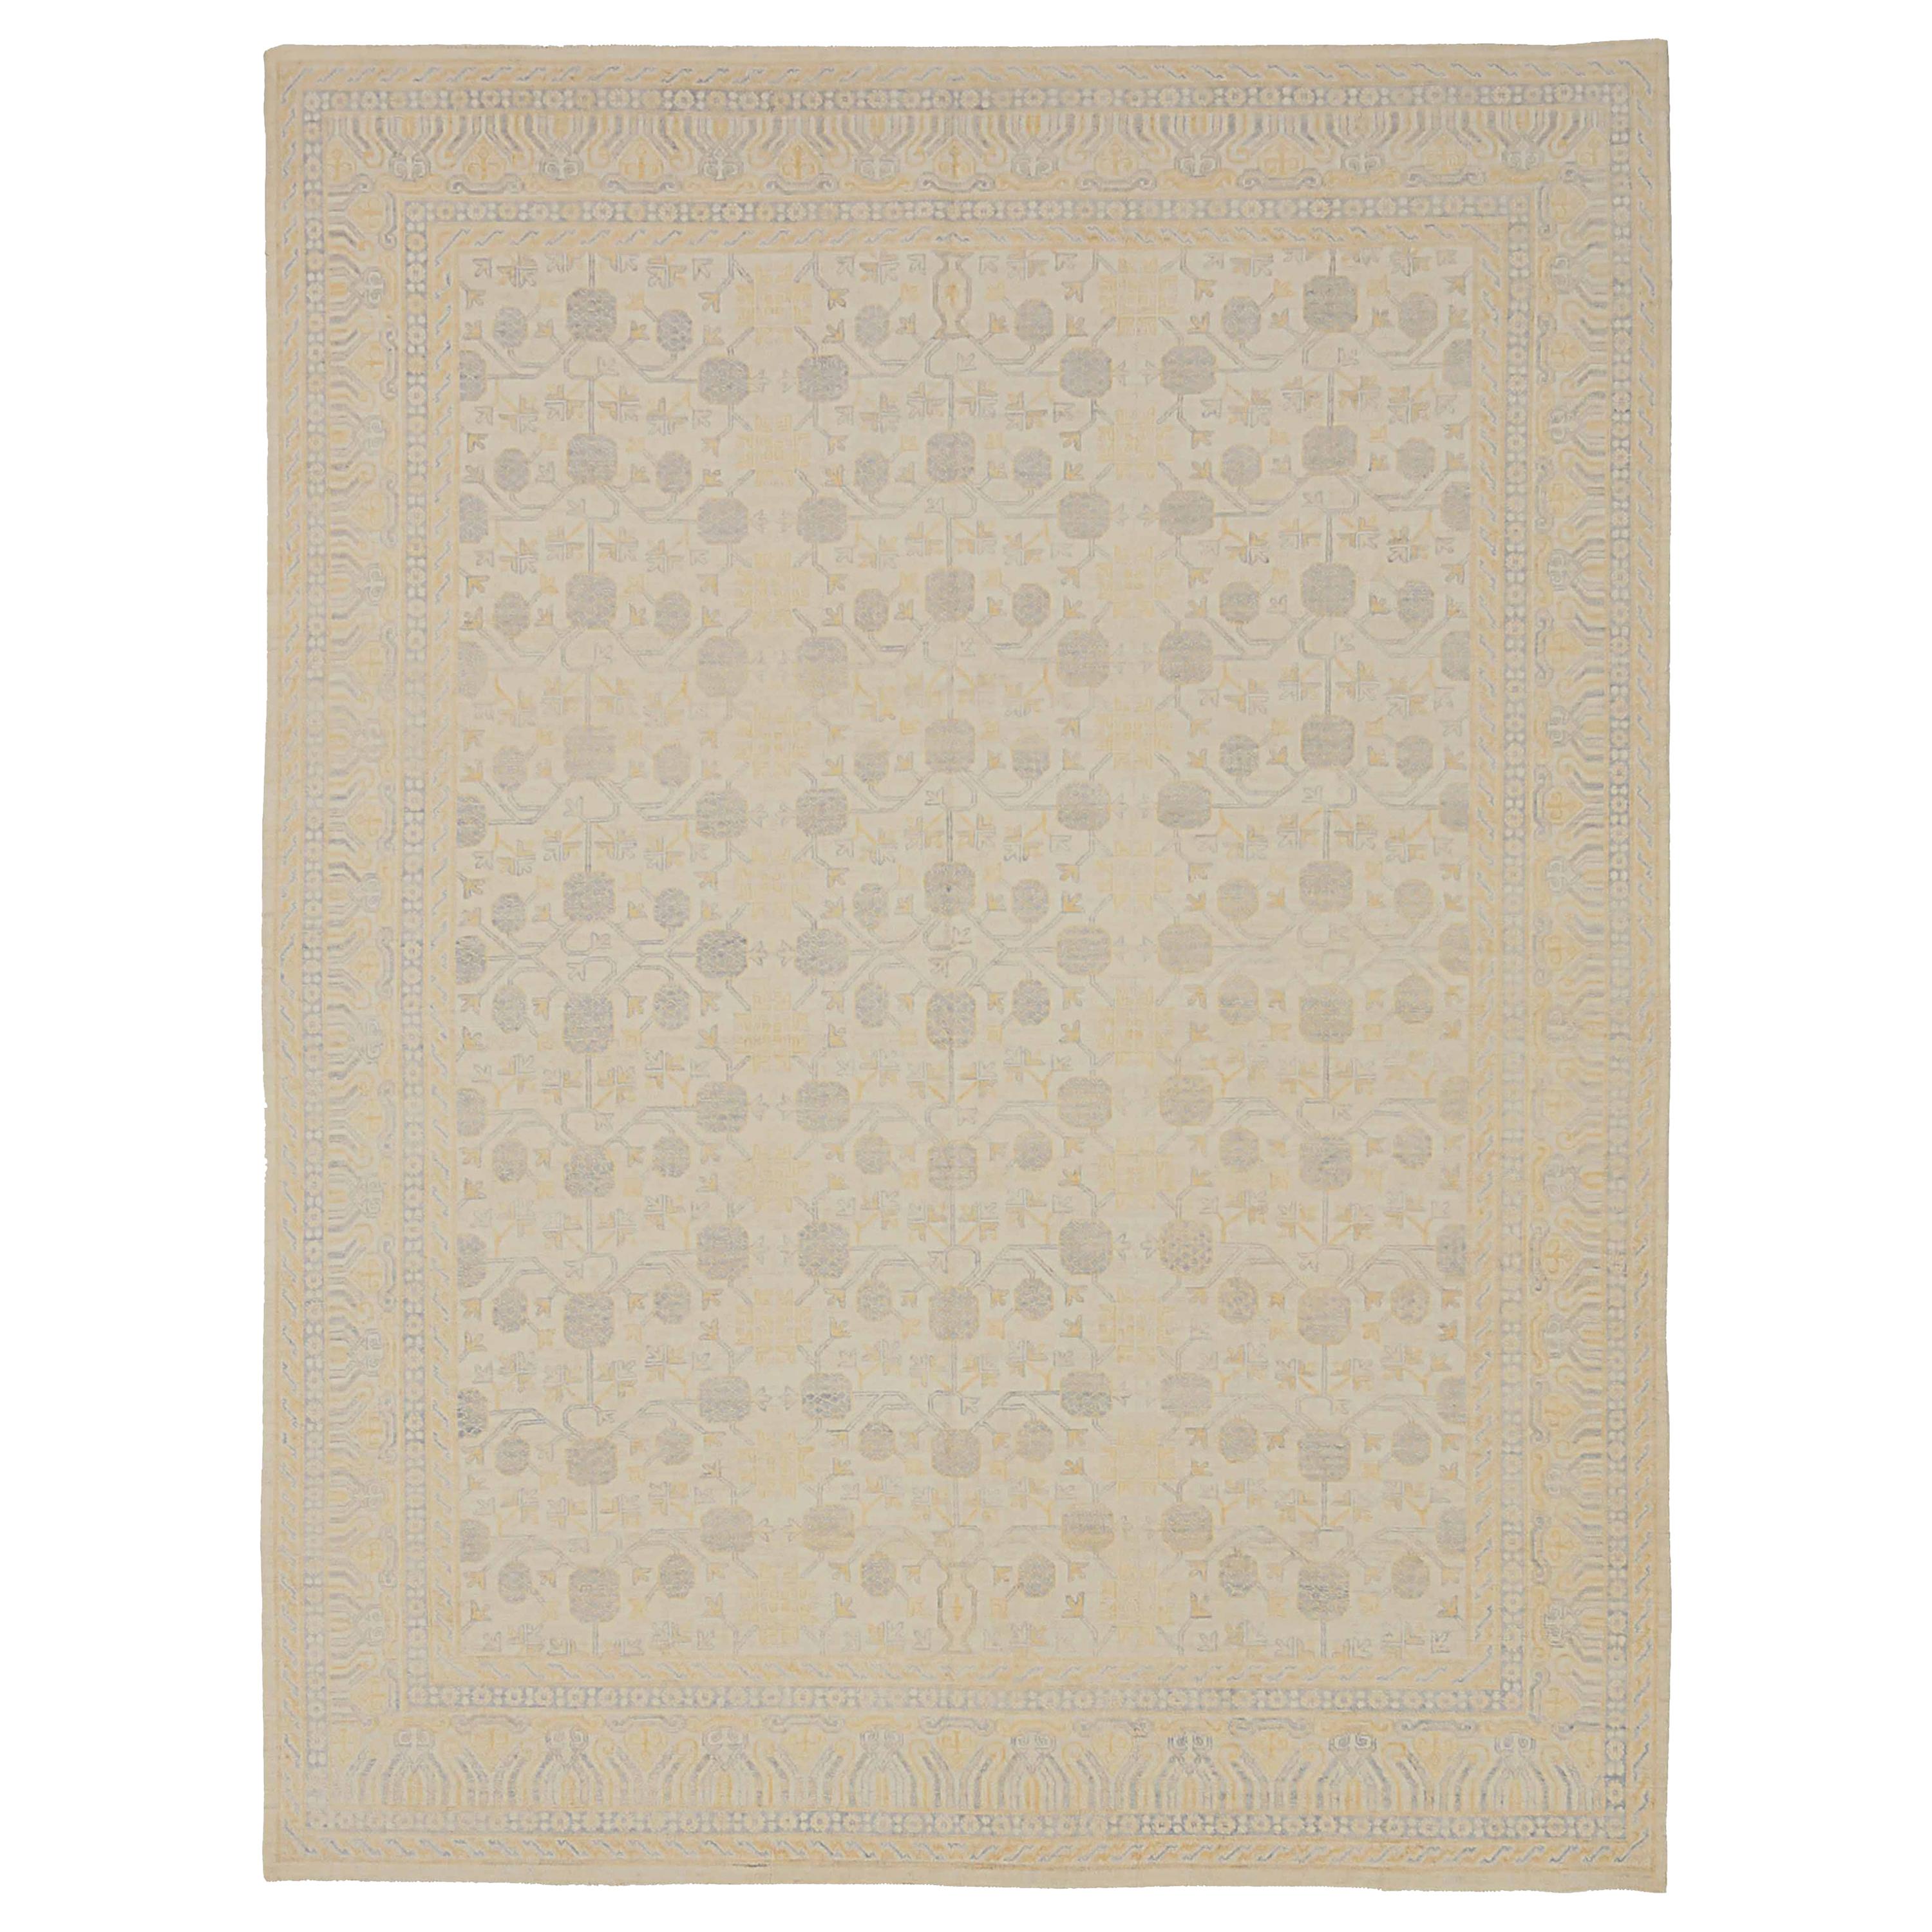 New Khotan Style Afghan Area Rug with '17th-Century' Look For Sale